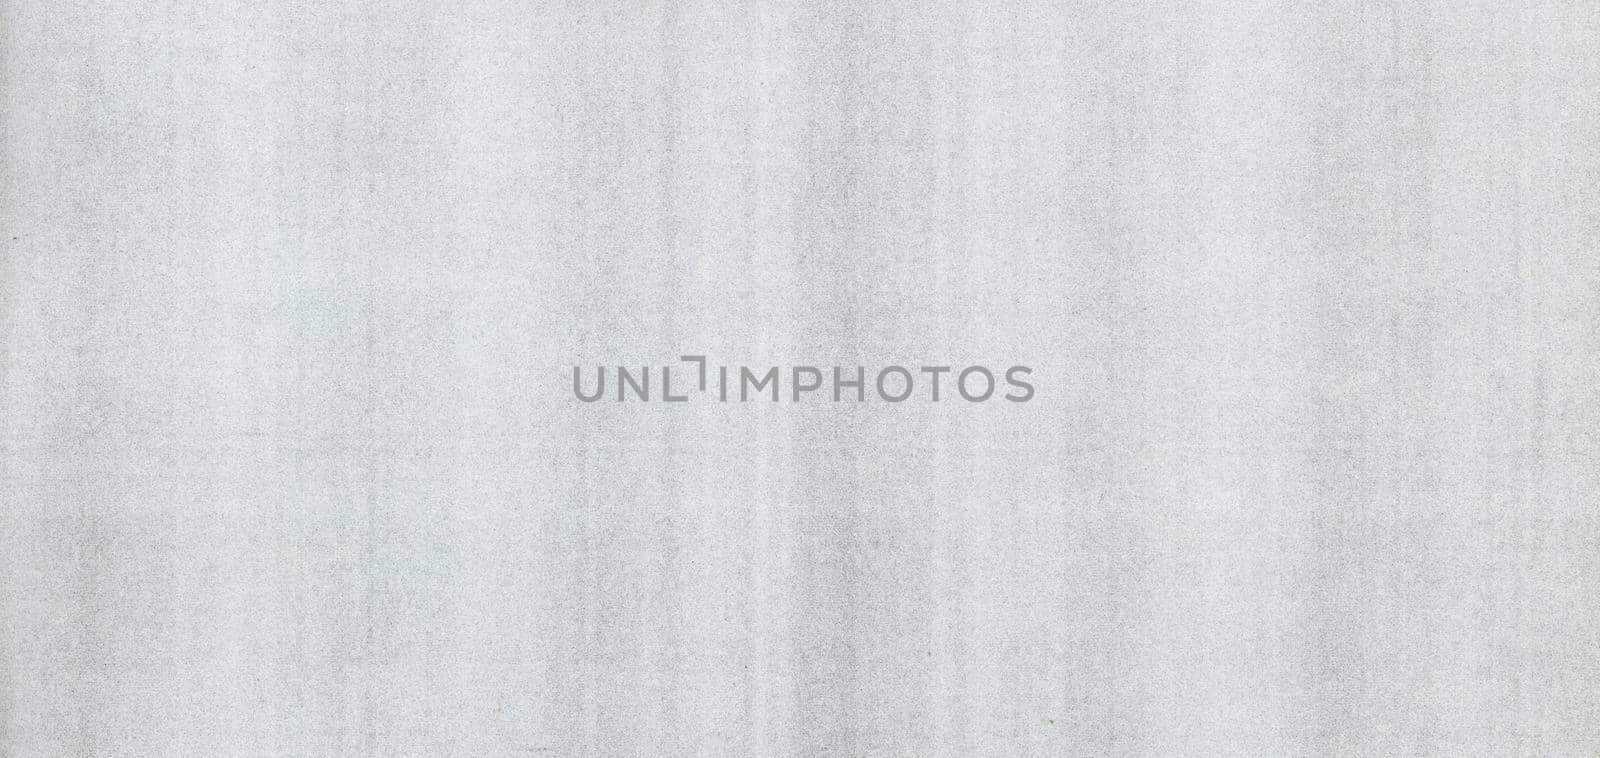 dirty photocopy gray paper texture background background by claudiodivizia